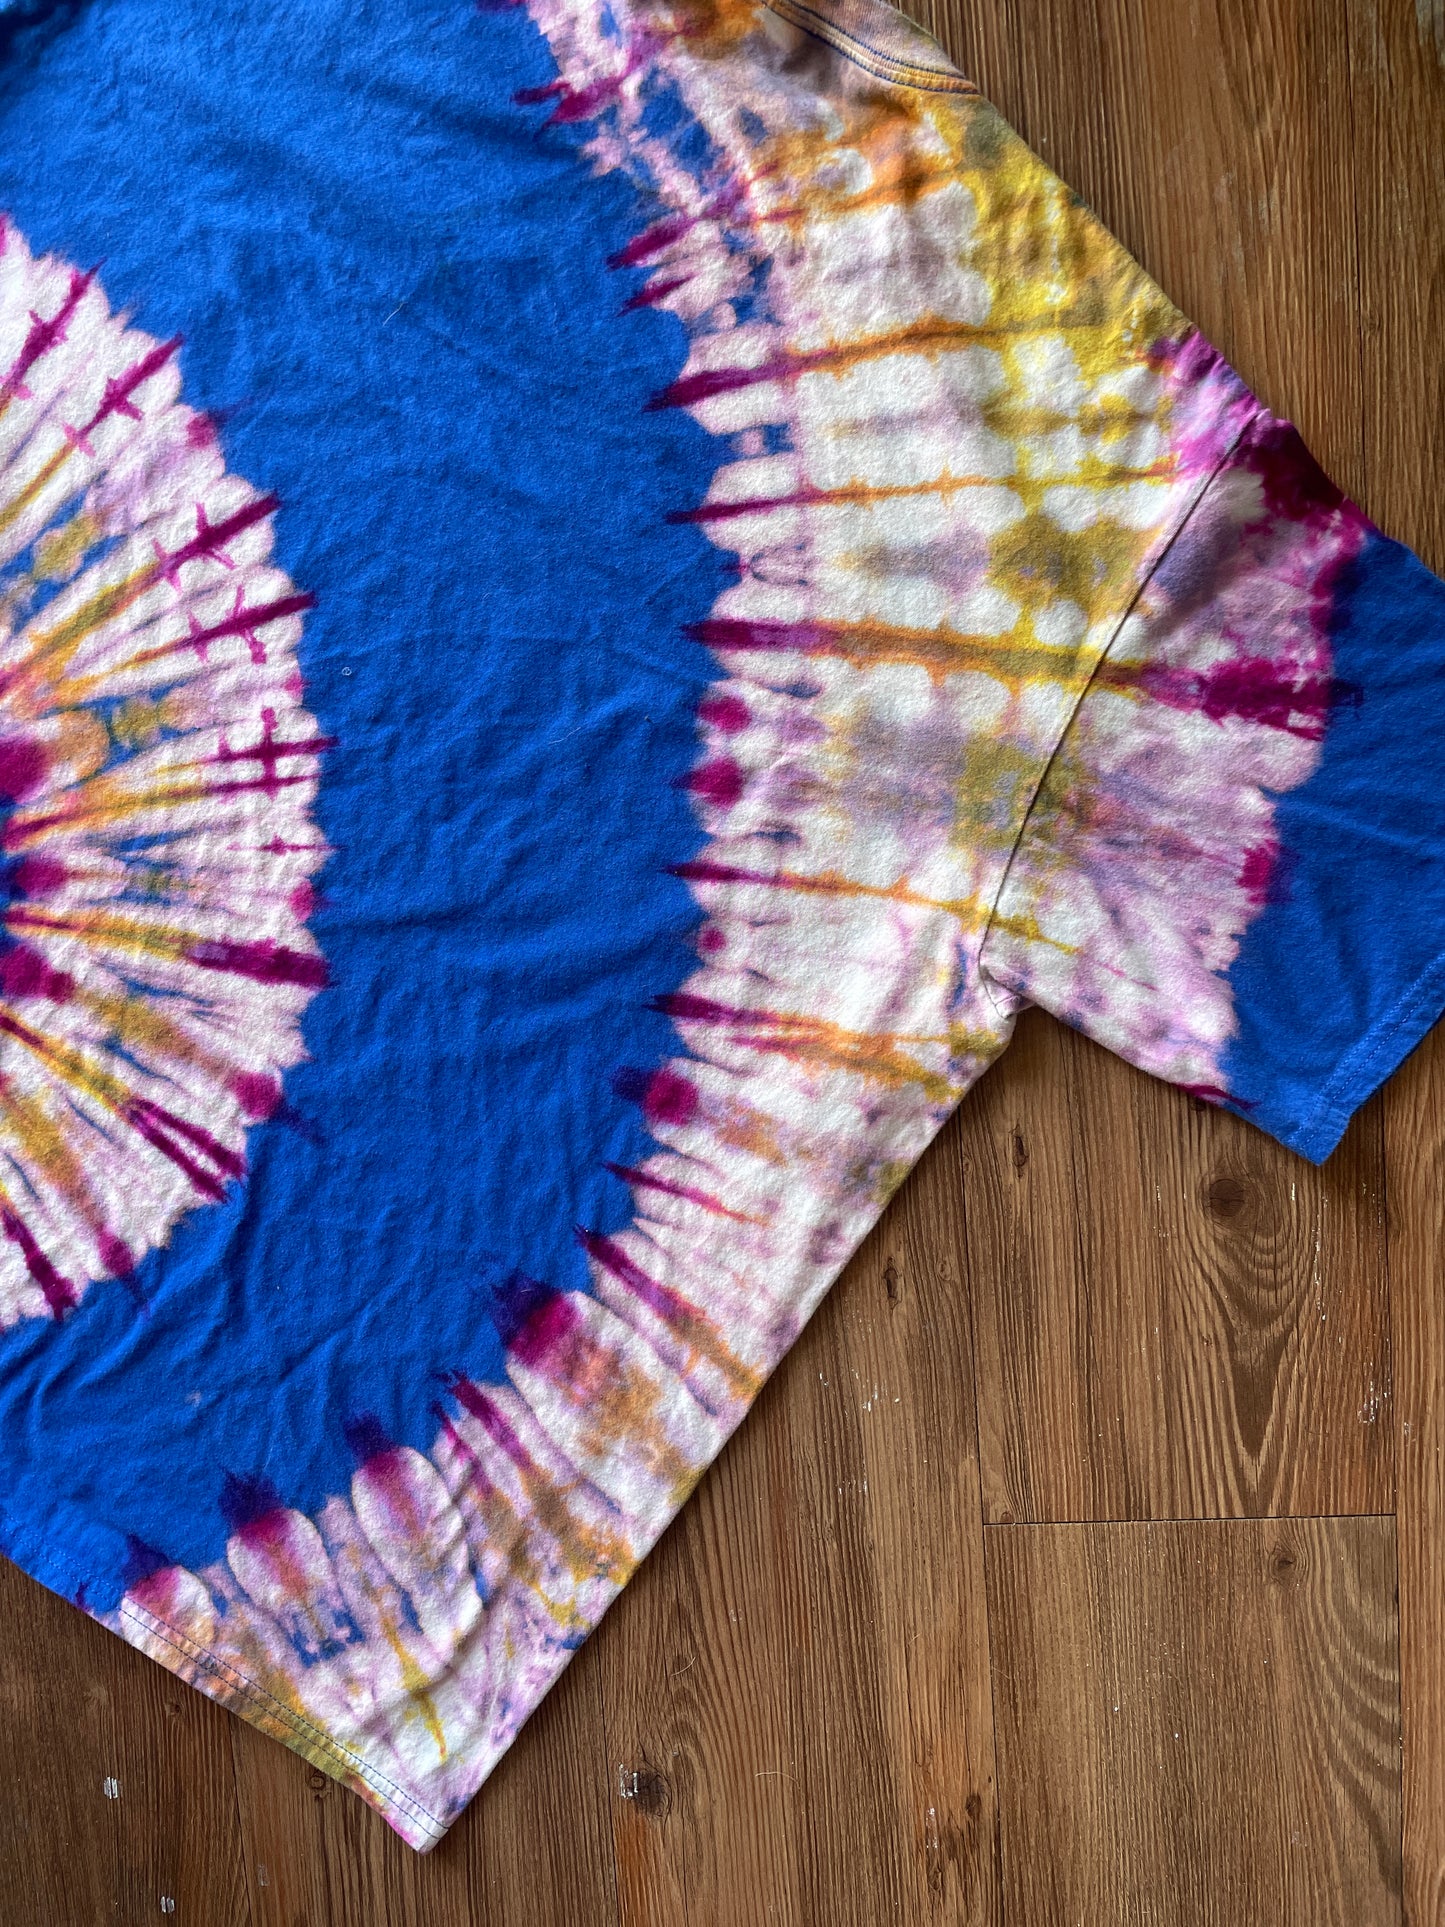 3XL Men’s Girls Just Wanna Have Fundamental Rights Handmade Tie Dye T-Shirt | One-Of-a-Kind Blue and Pink Spiral Short Sleeve